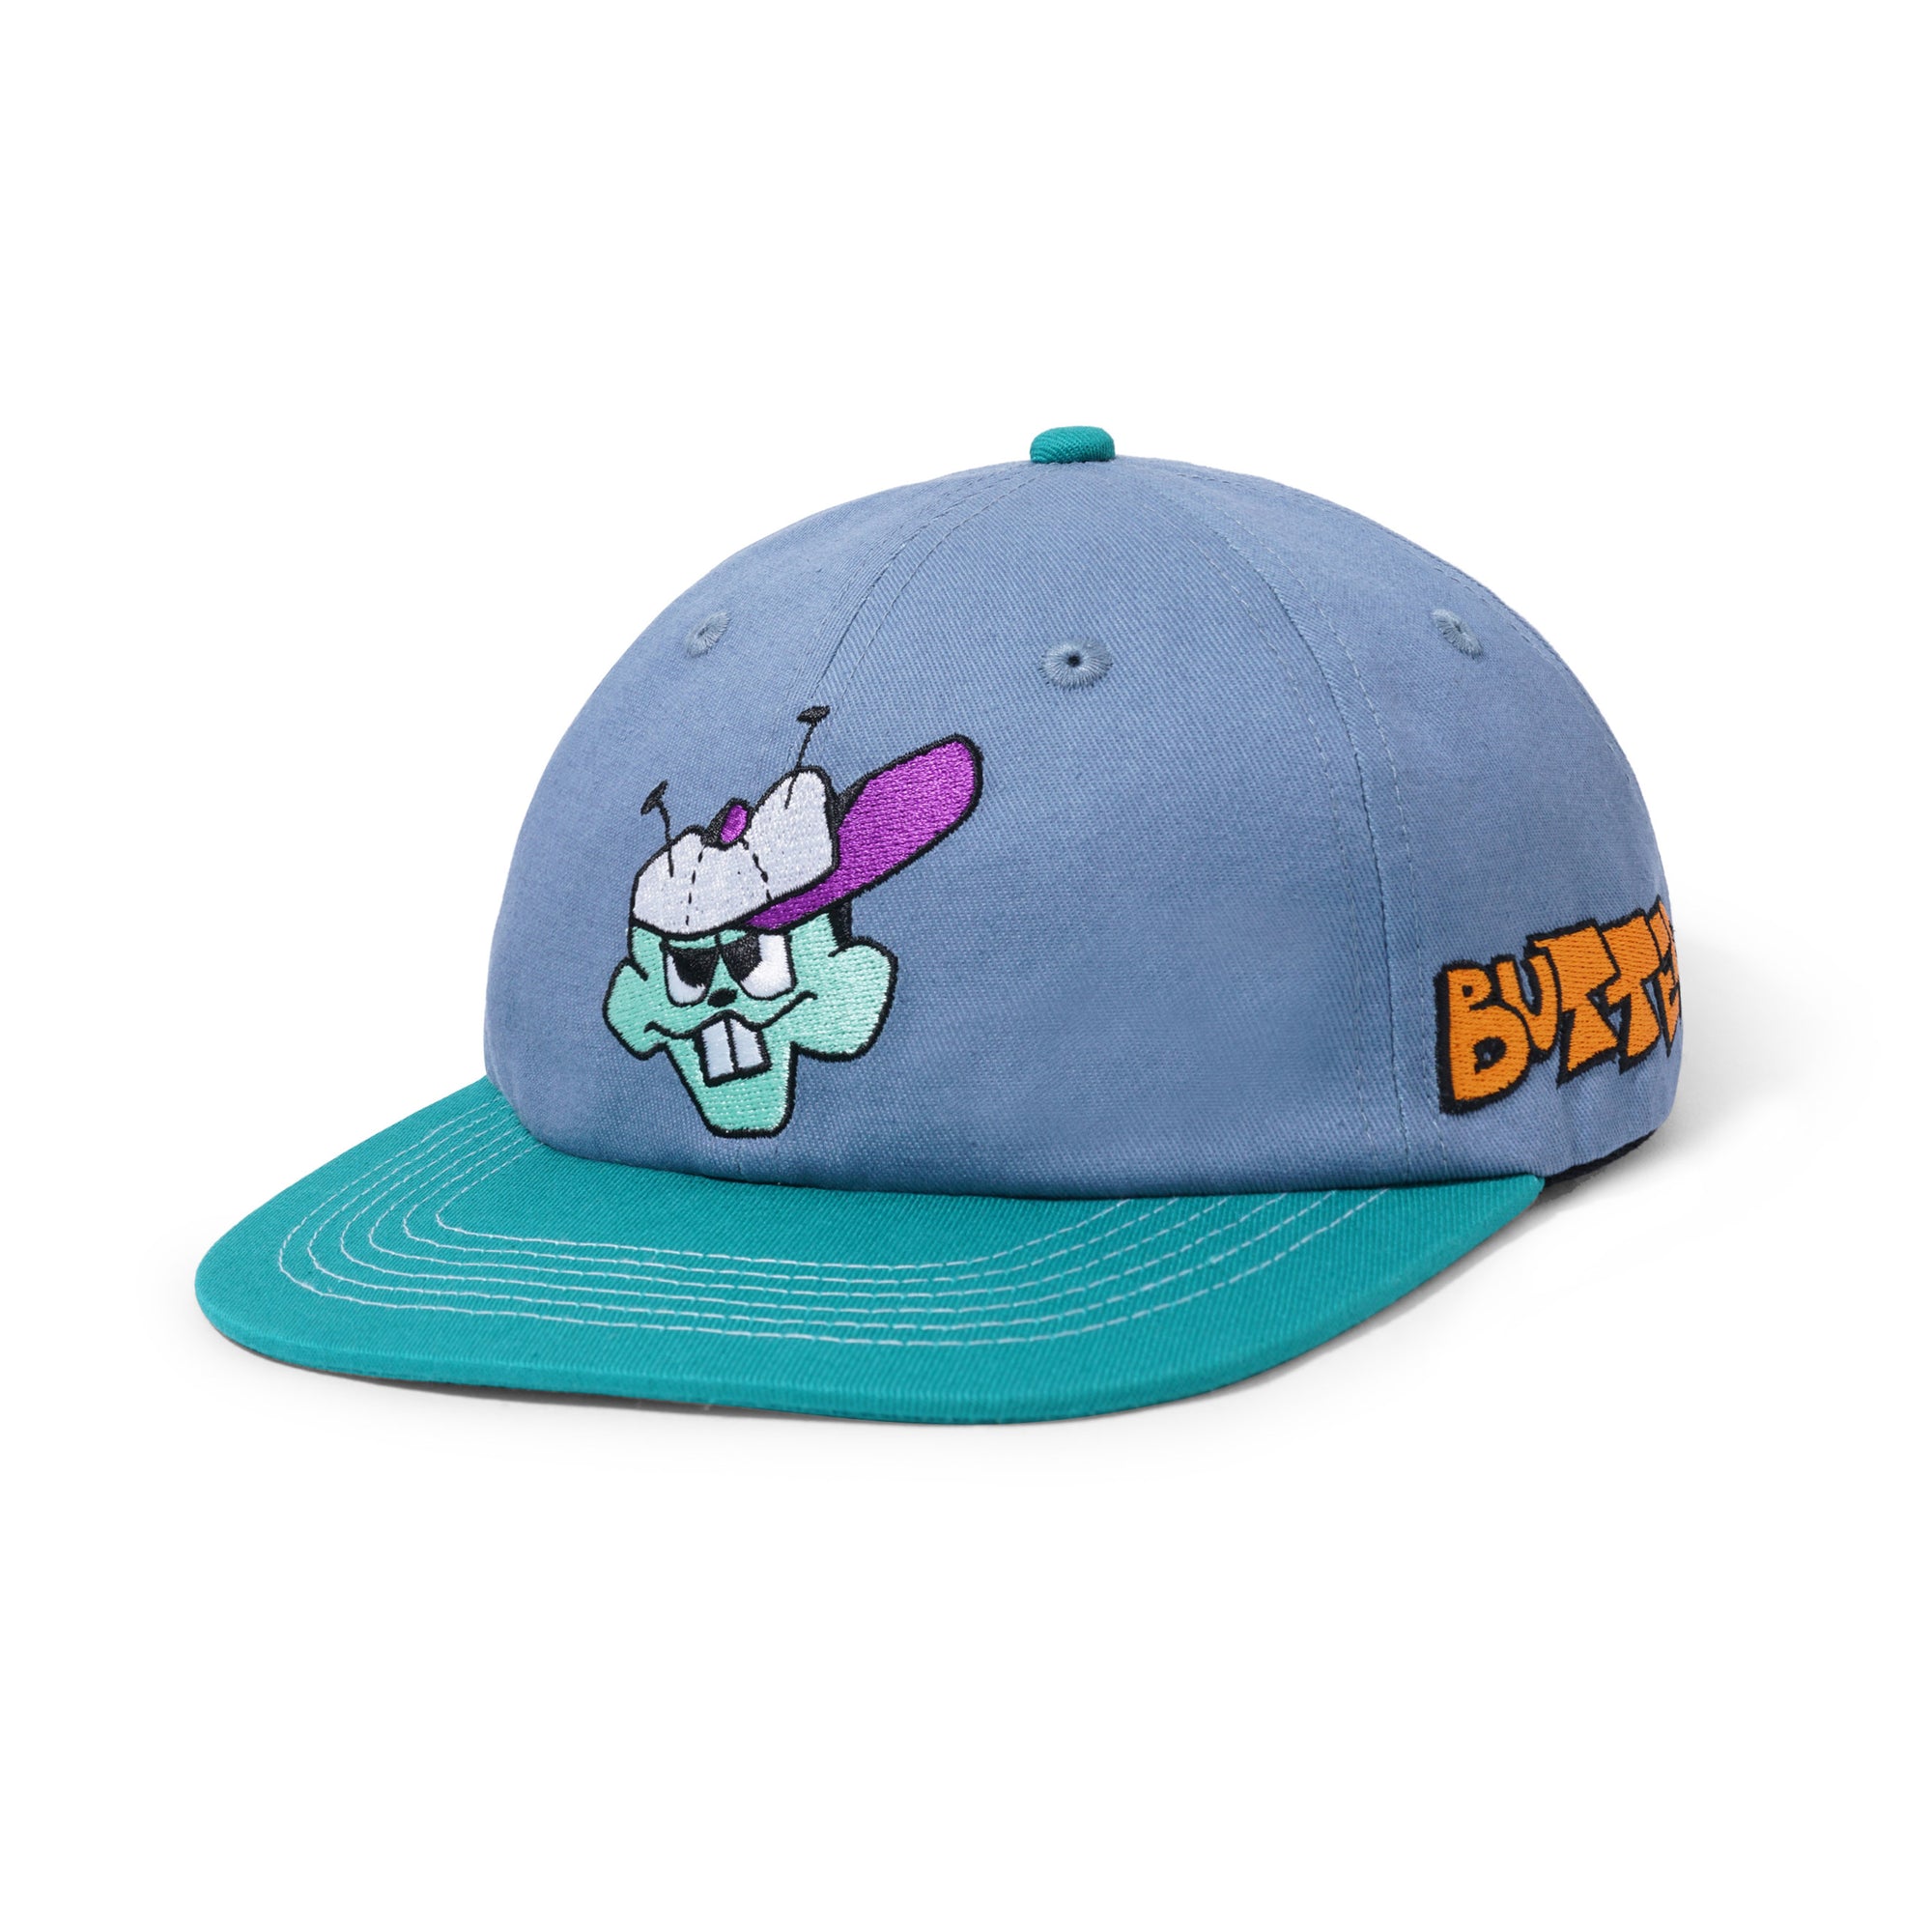 Butter Goods Bug Out 6 Panel Cap Lake Blue